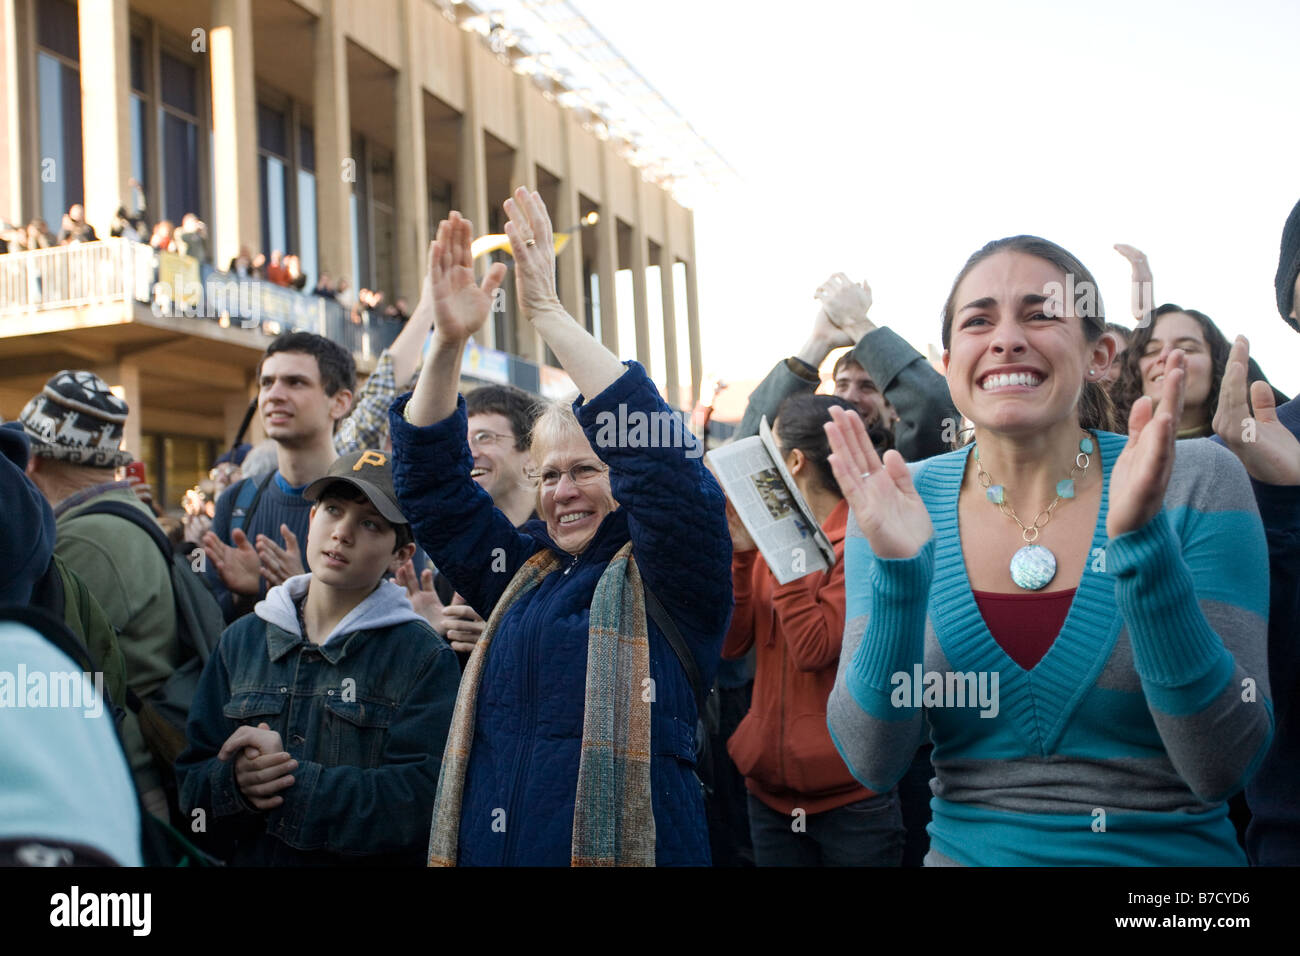 An emotional crowd celebrates the inauguration of Barack Obama at the University of California at Berkeley campus. Stock Photo